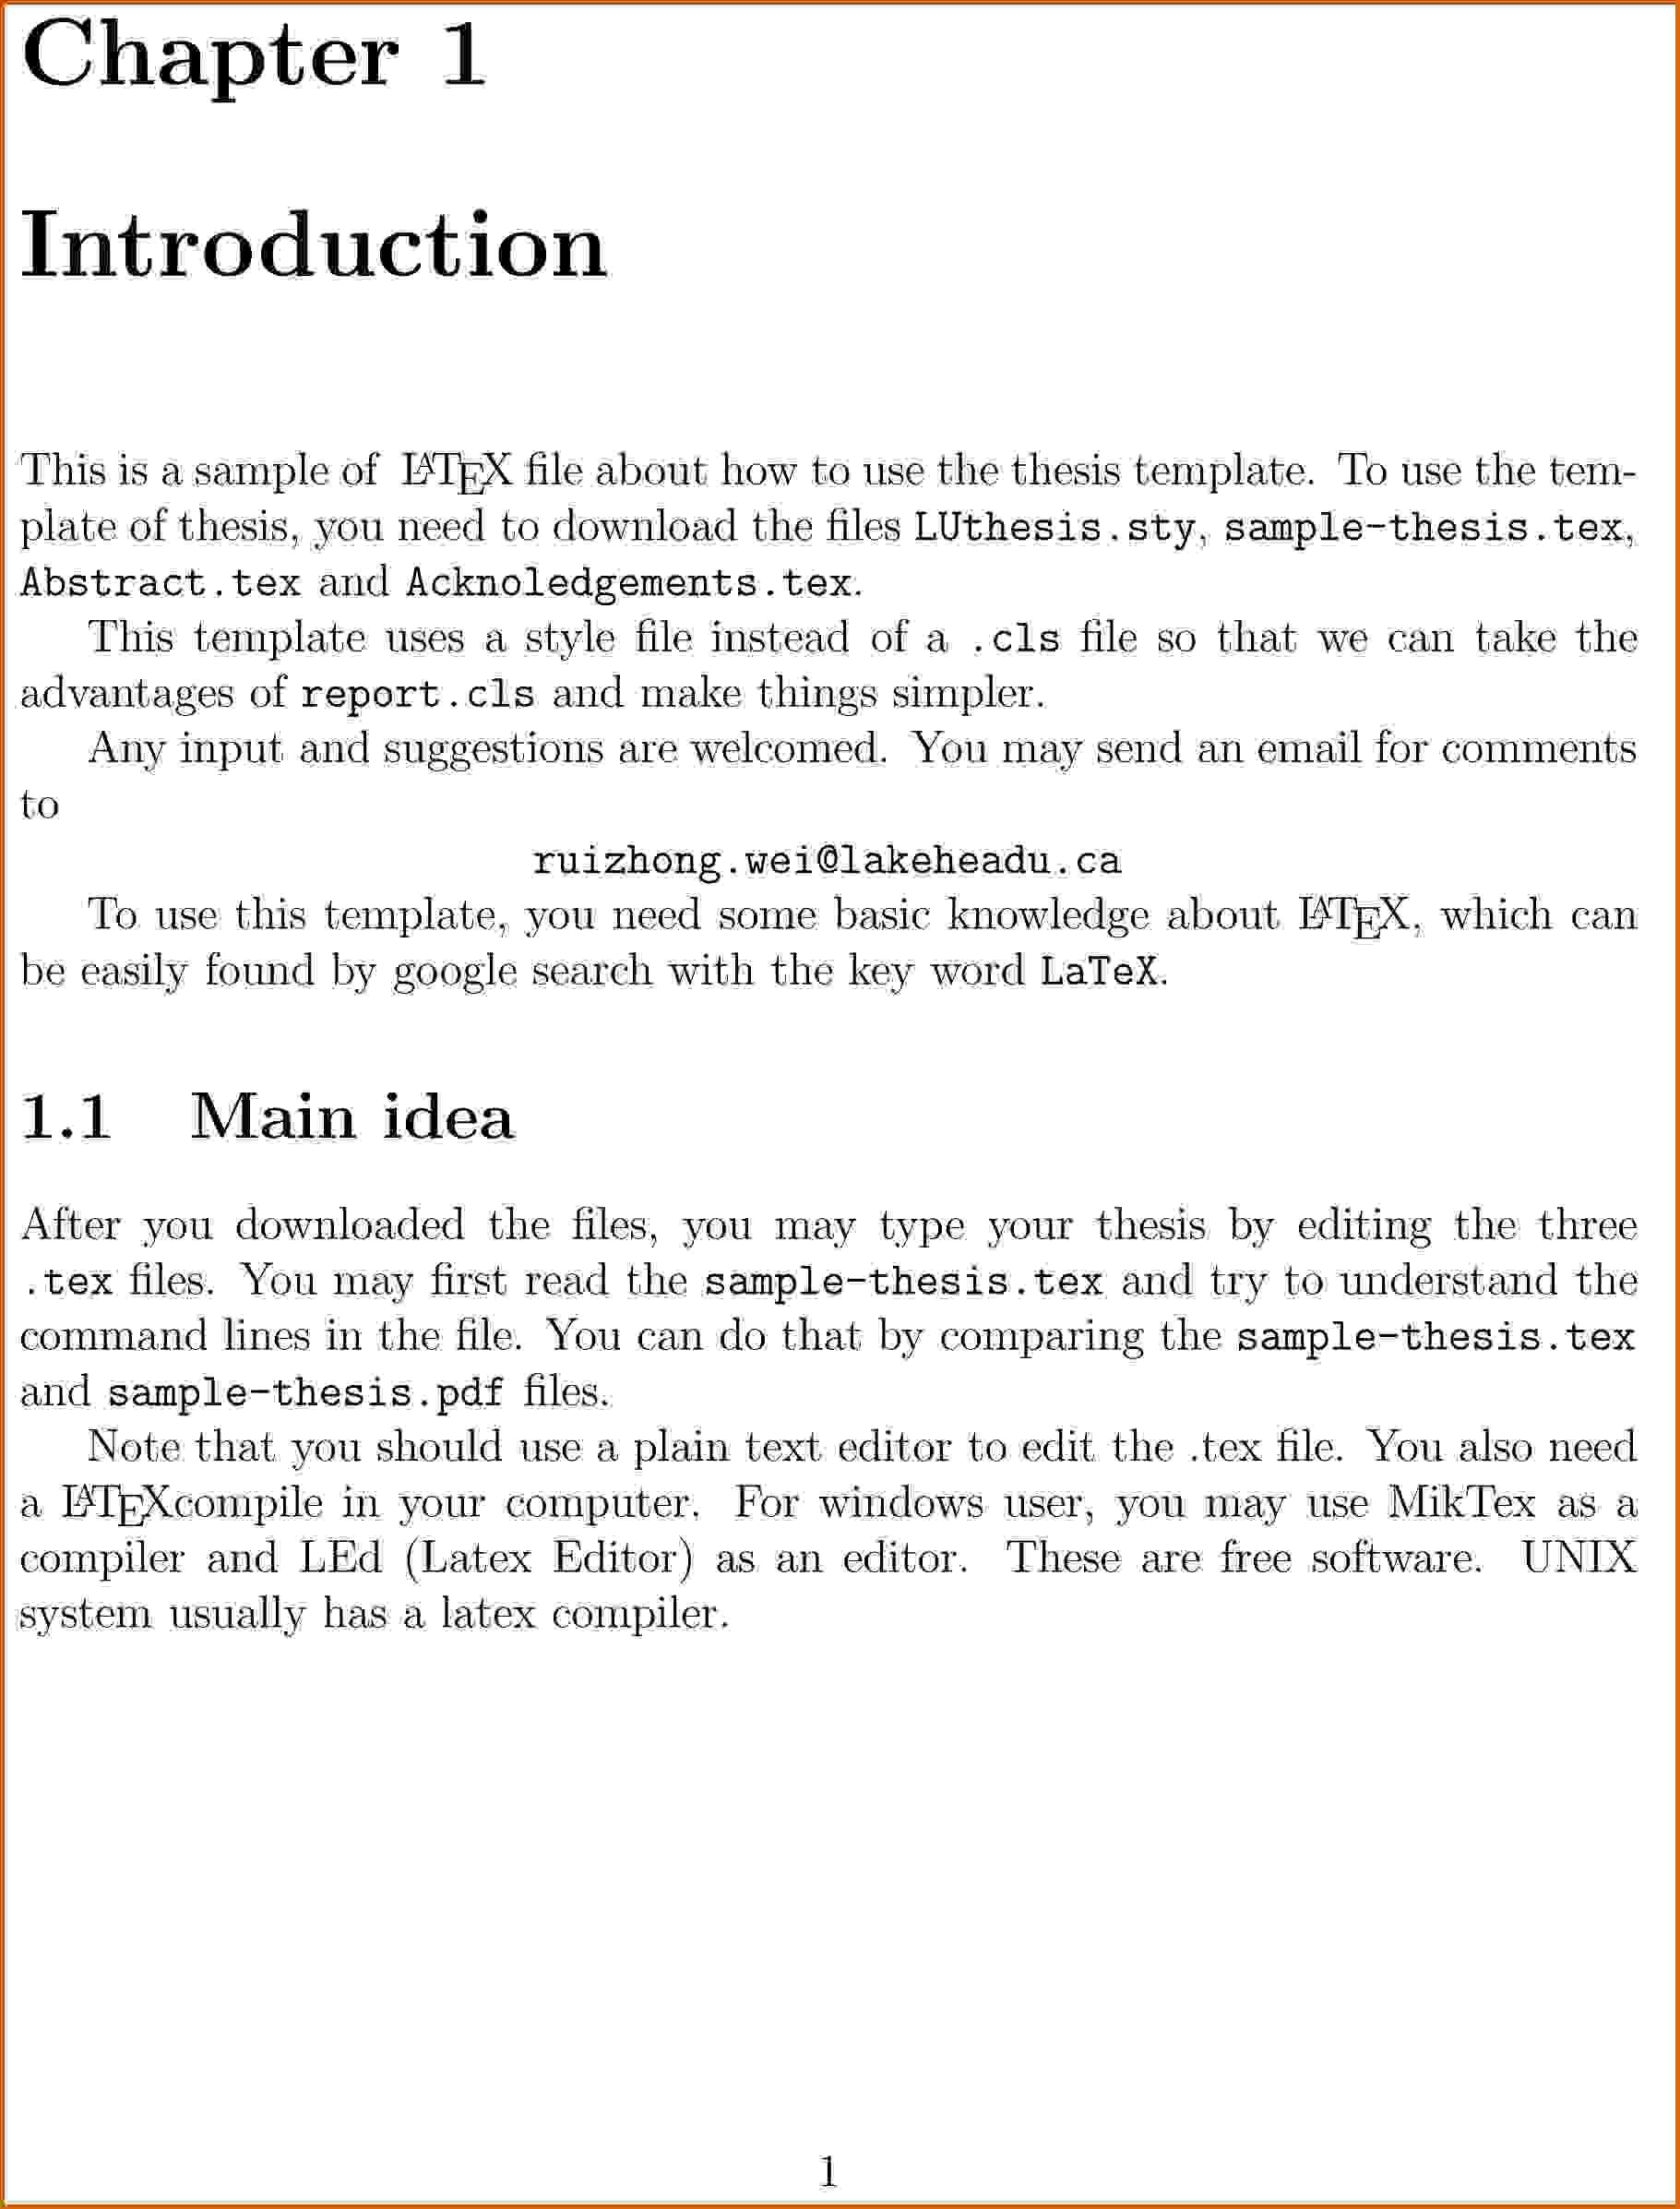 011 Essay Introduction Example Best Ideas Of An Marvelous At Intended For Introduction Template For Report